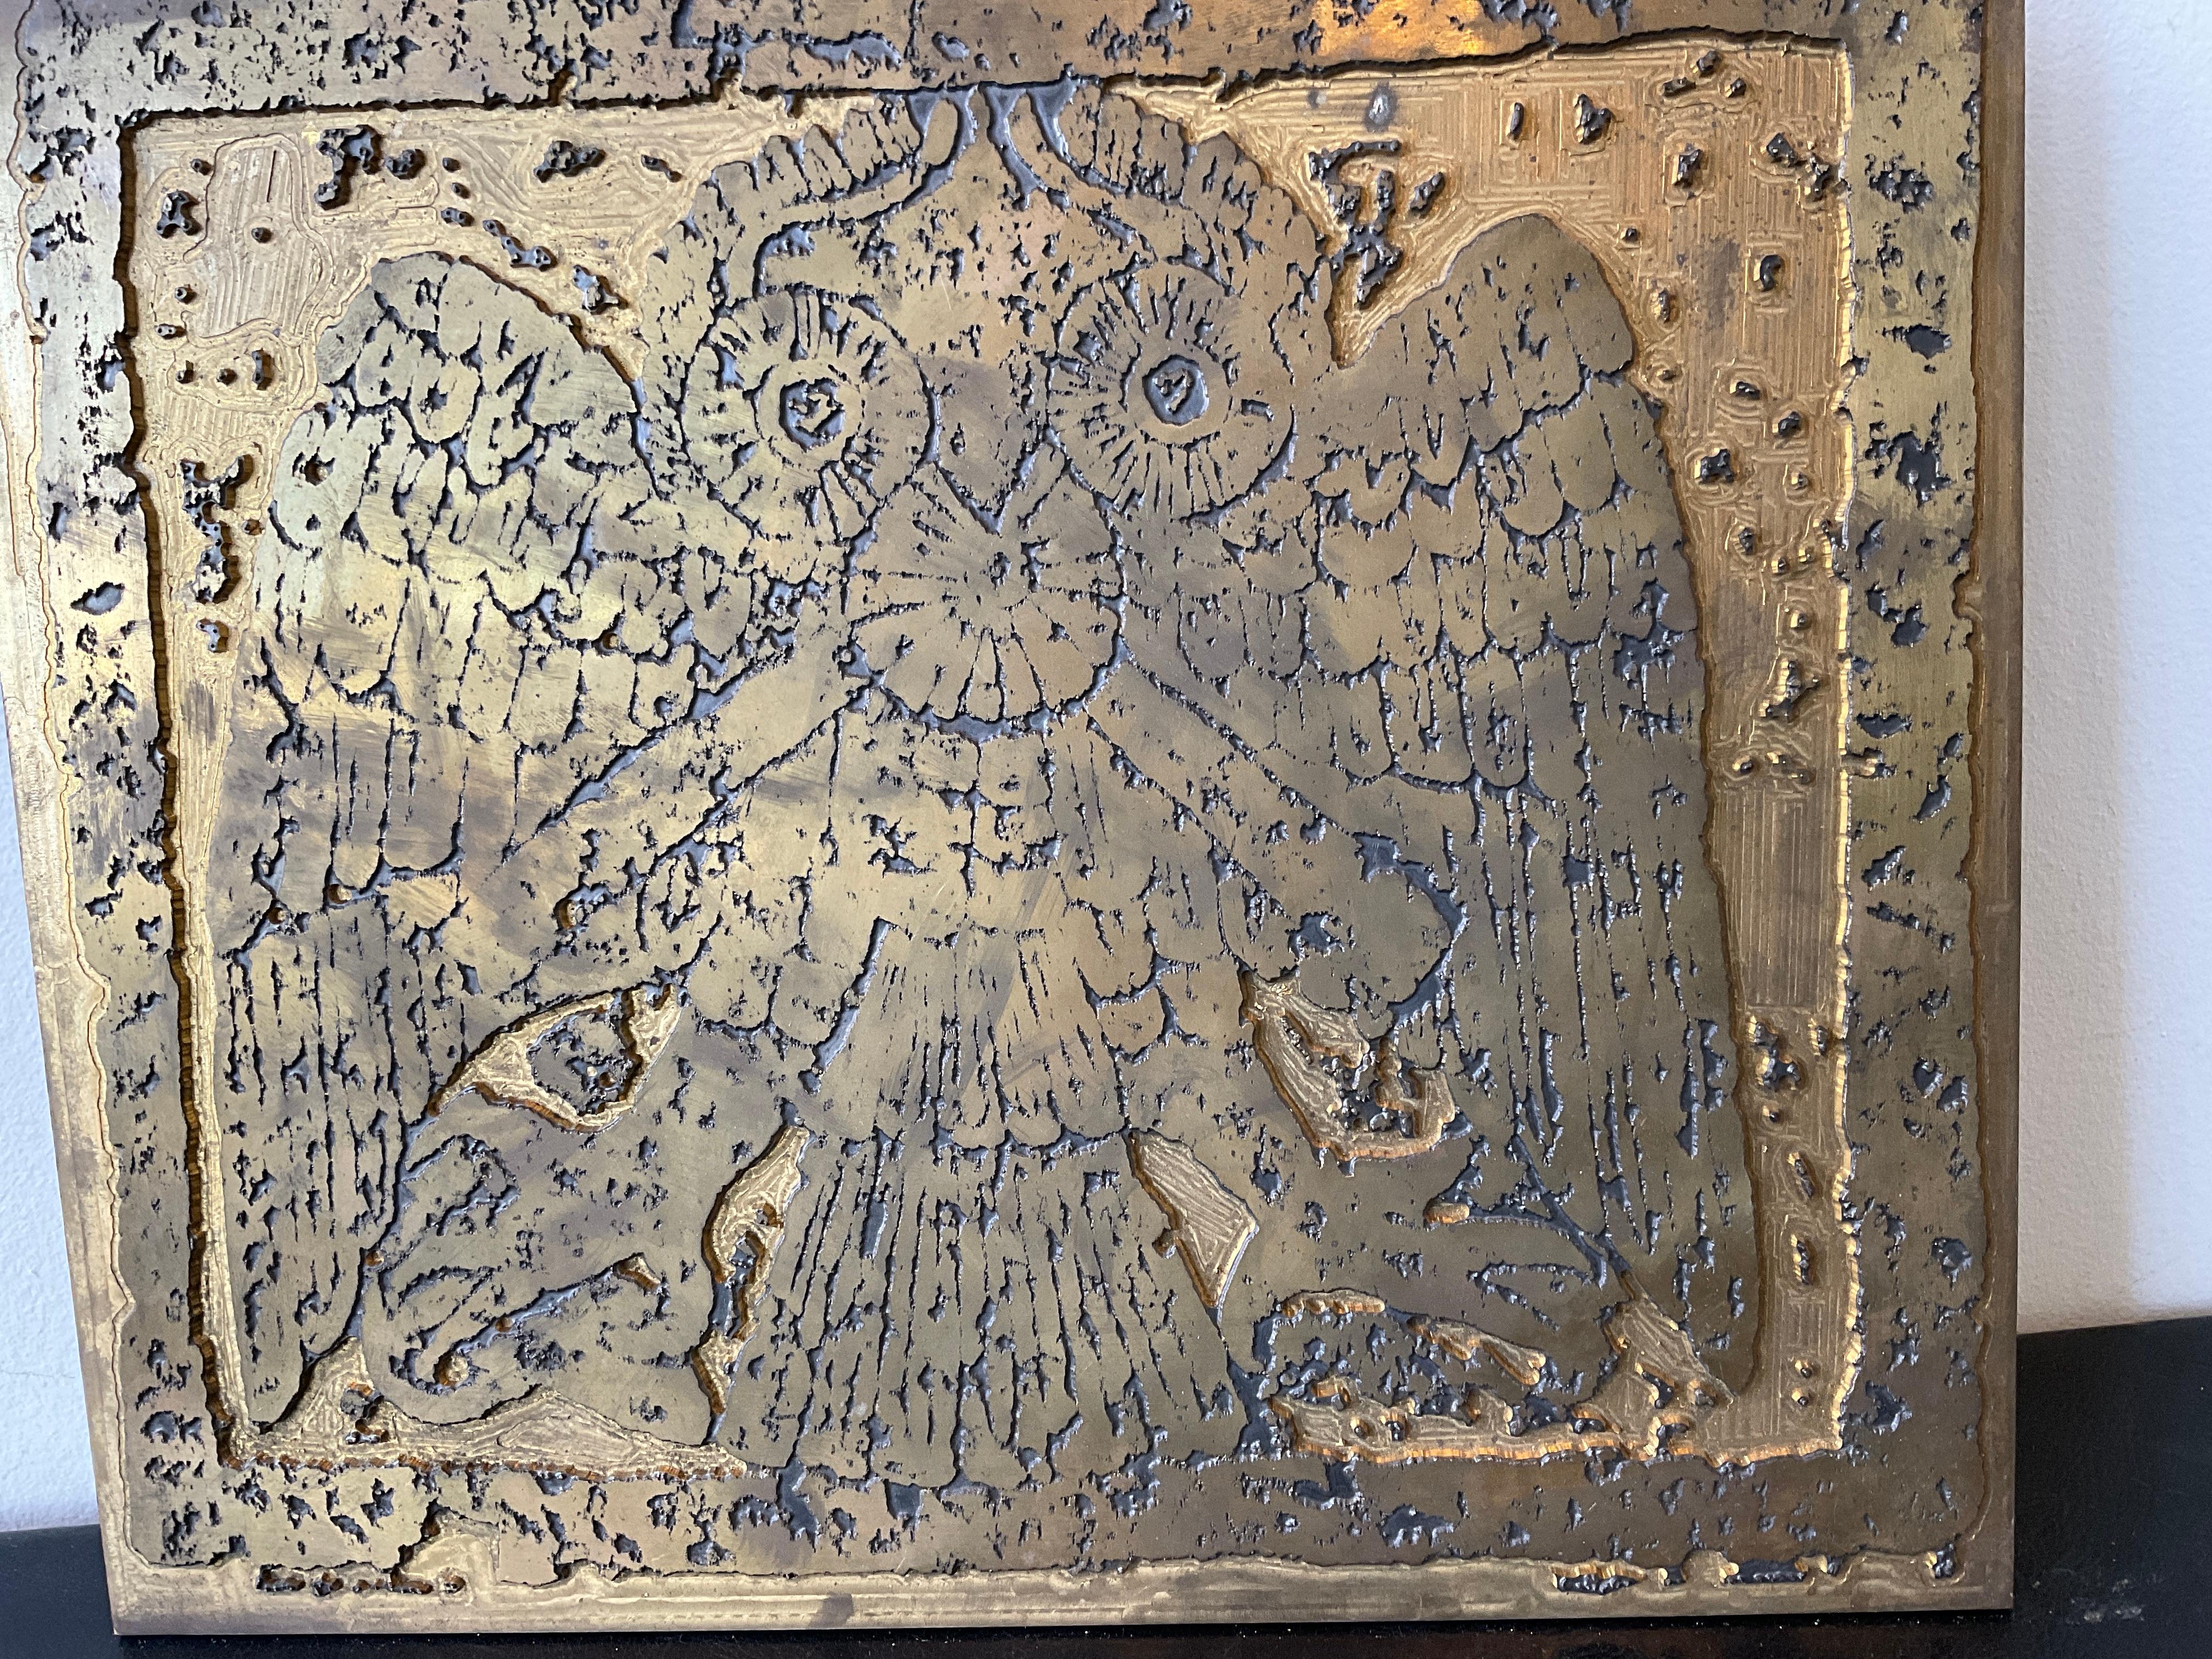 1960s Bronze printing plate of an owl. Marked Greenspan Kushliv. Nice weight to this piece.